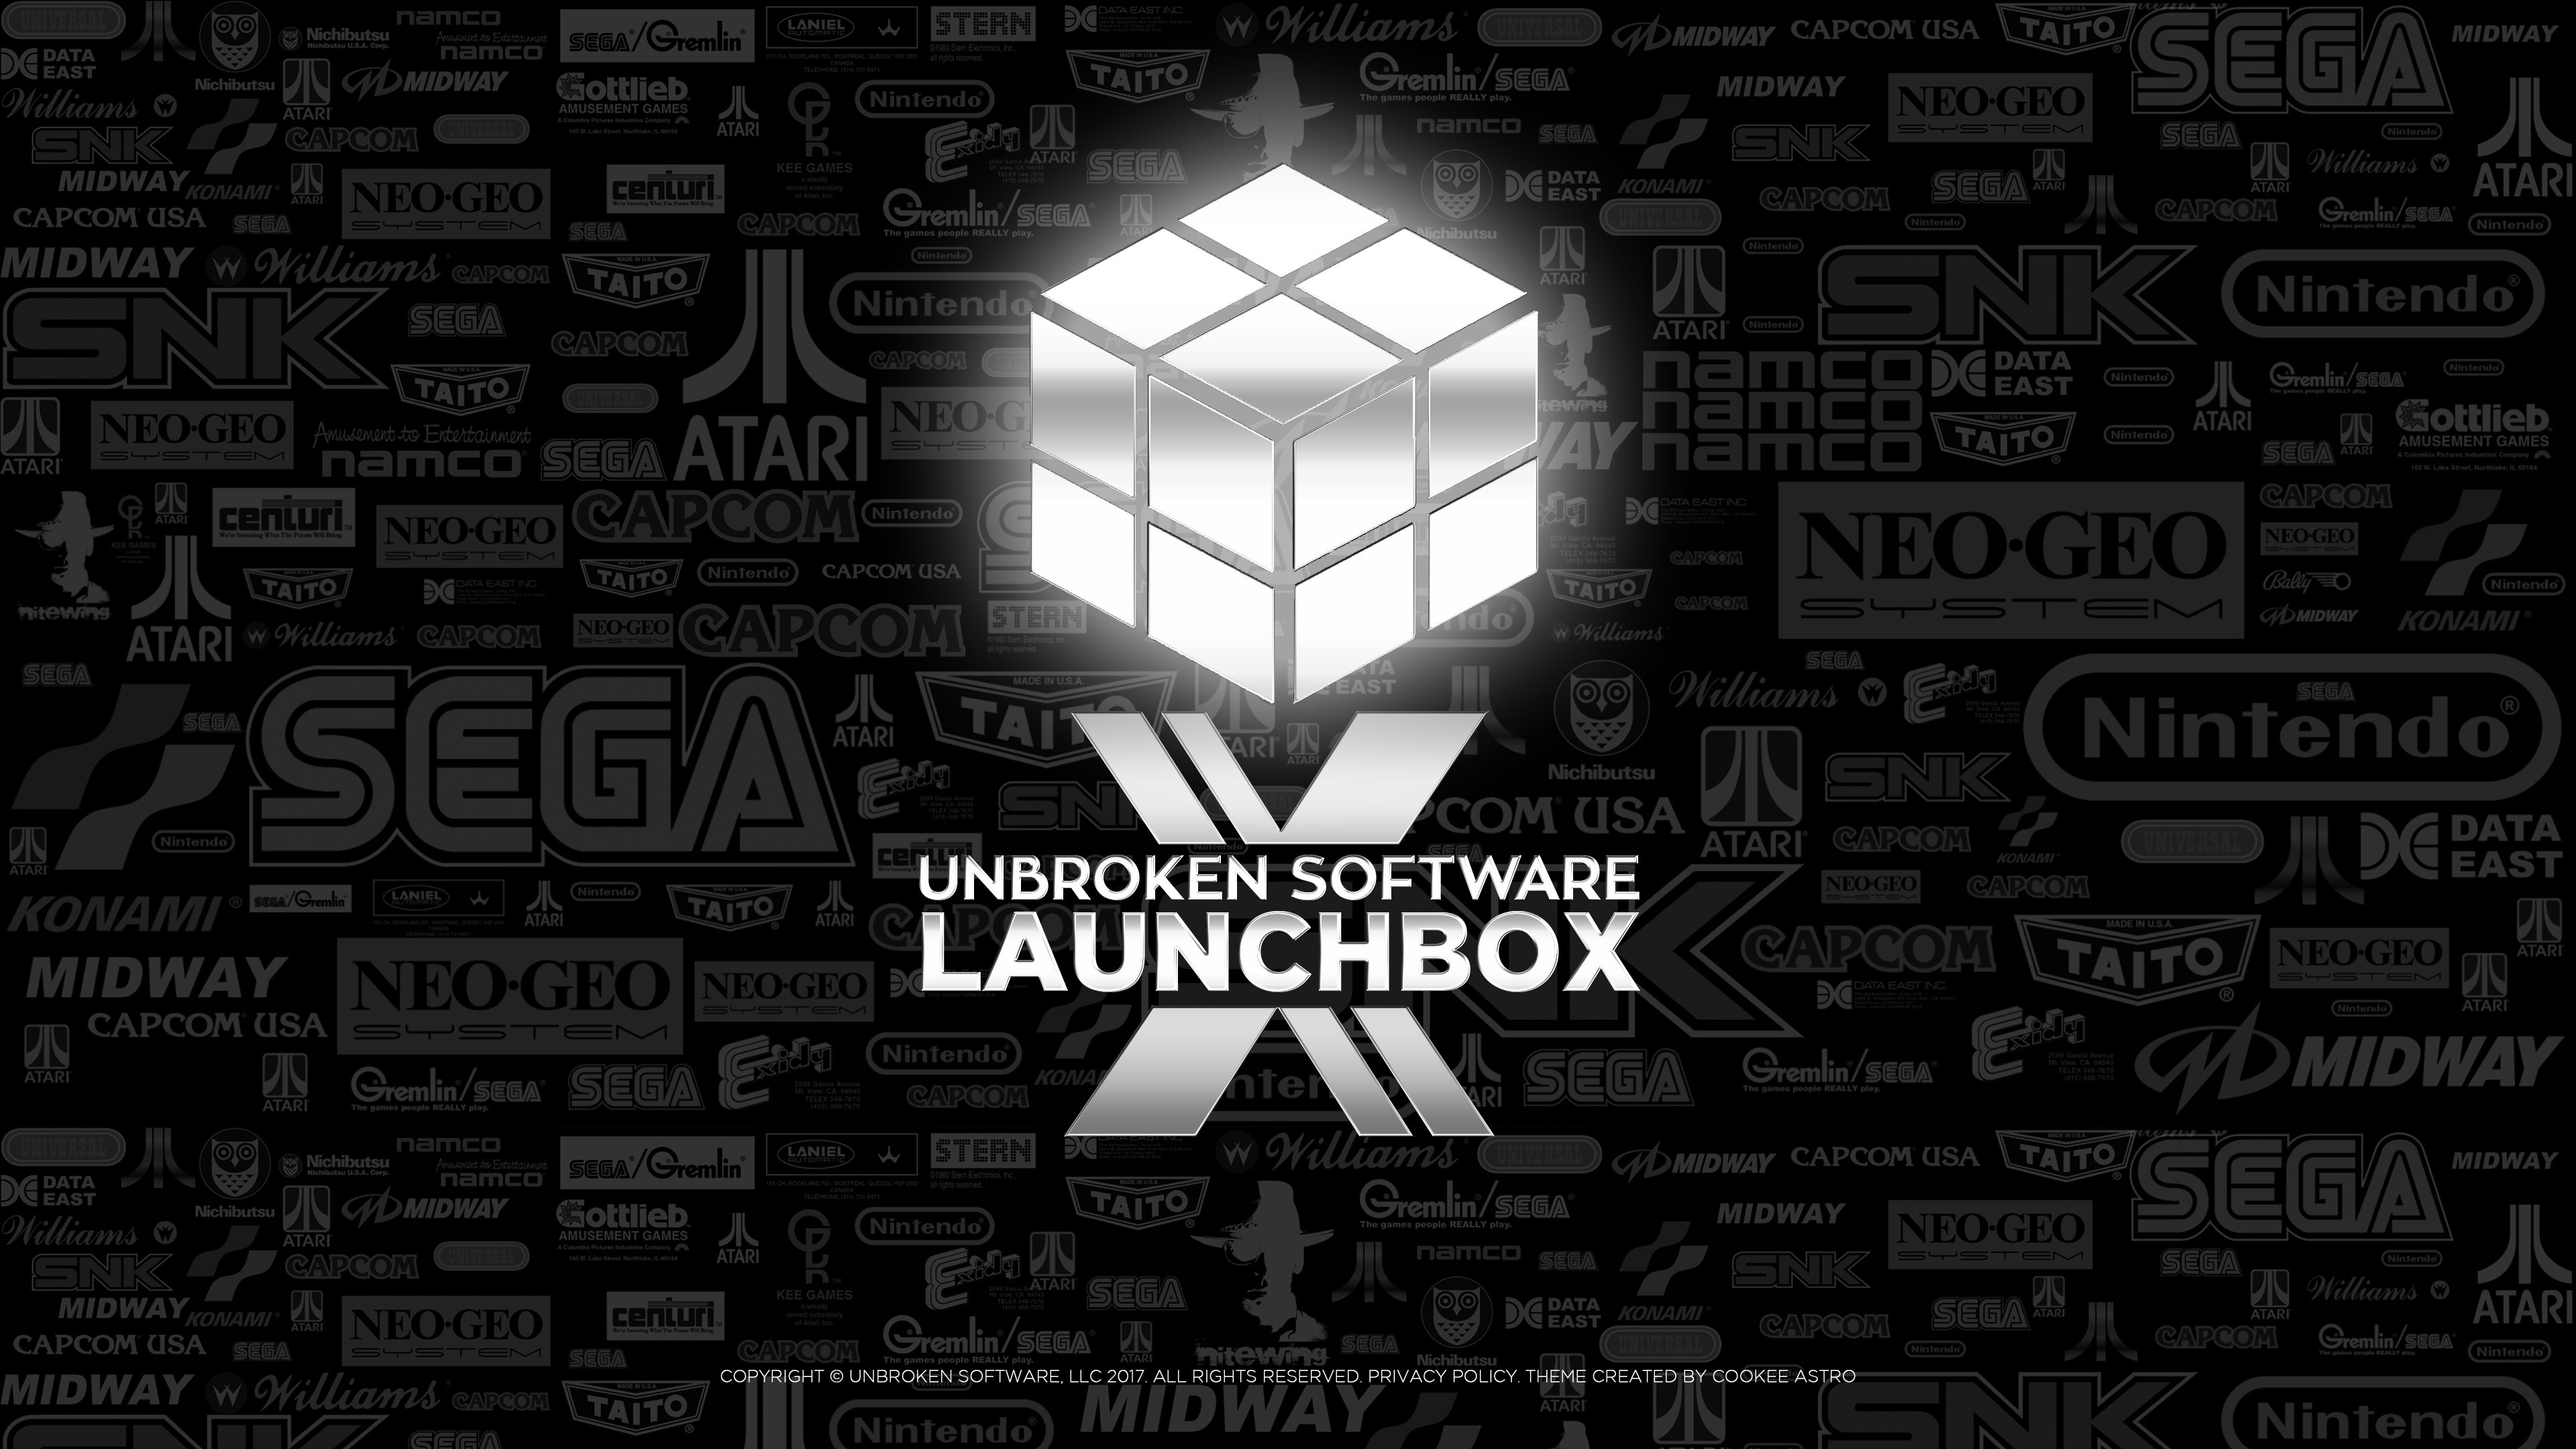 More information about "LaunchBox X by Cookz718 (Cookee Astro)"